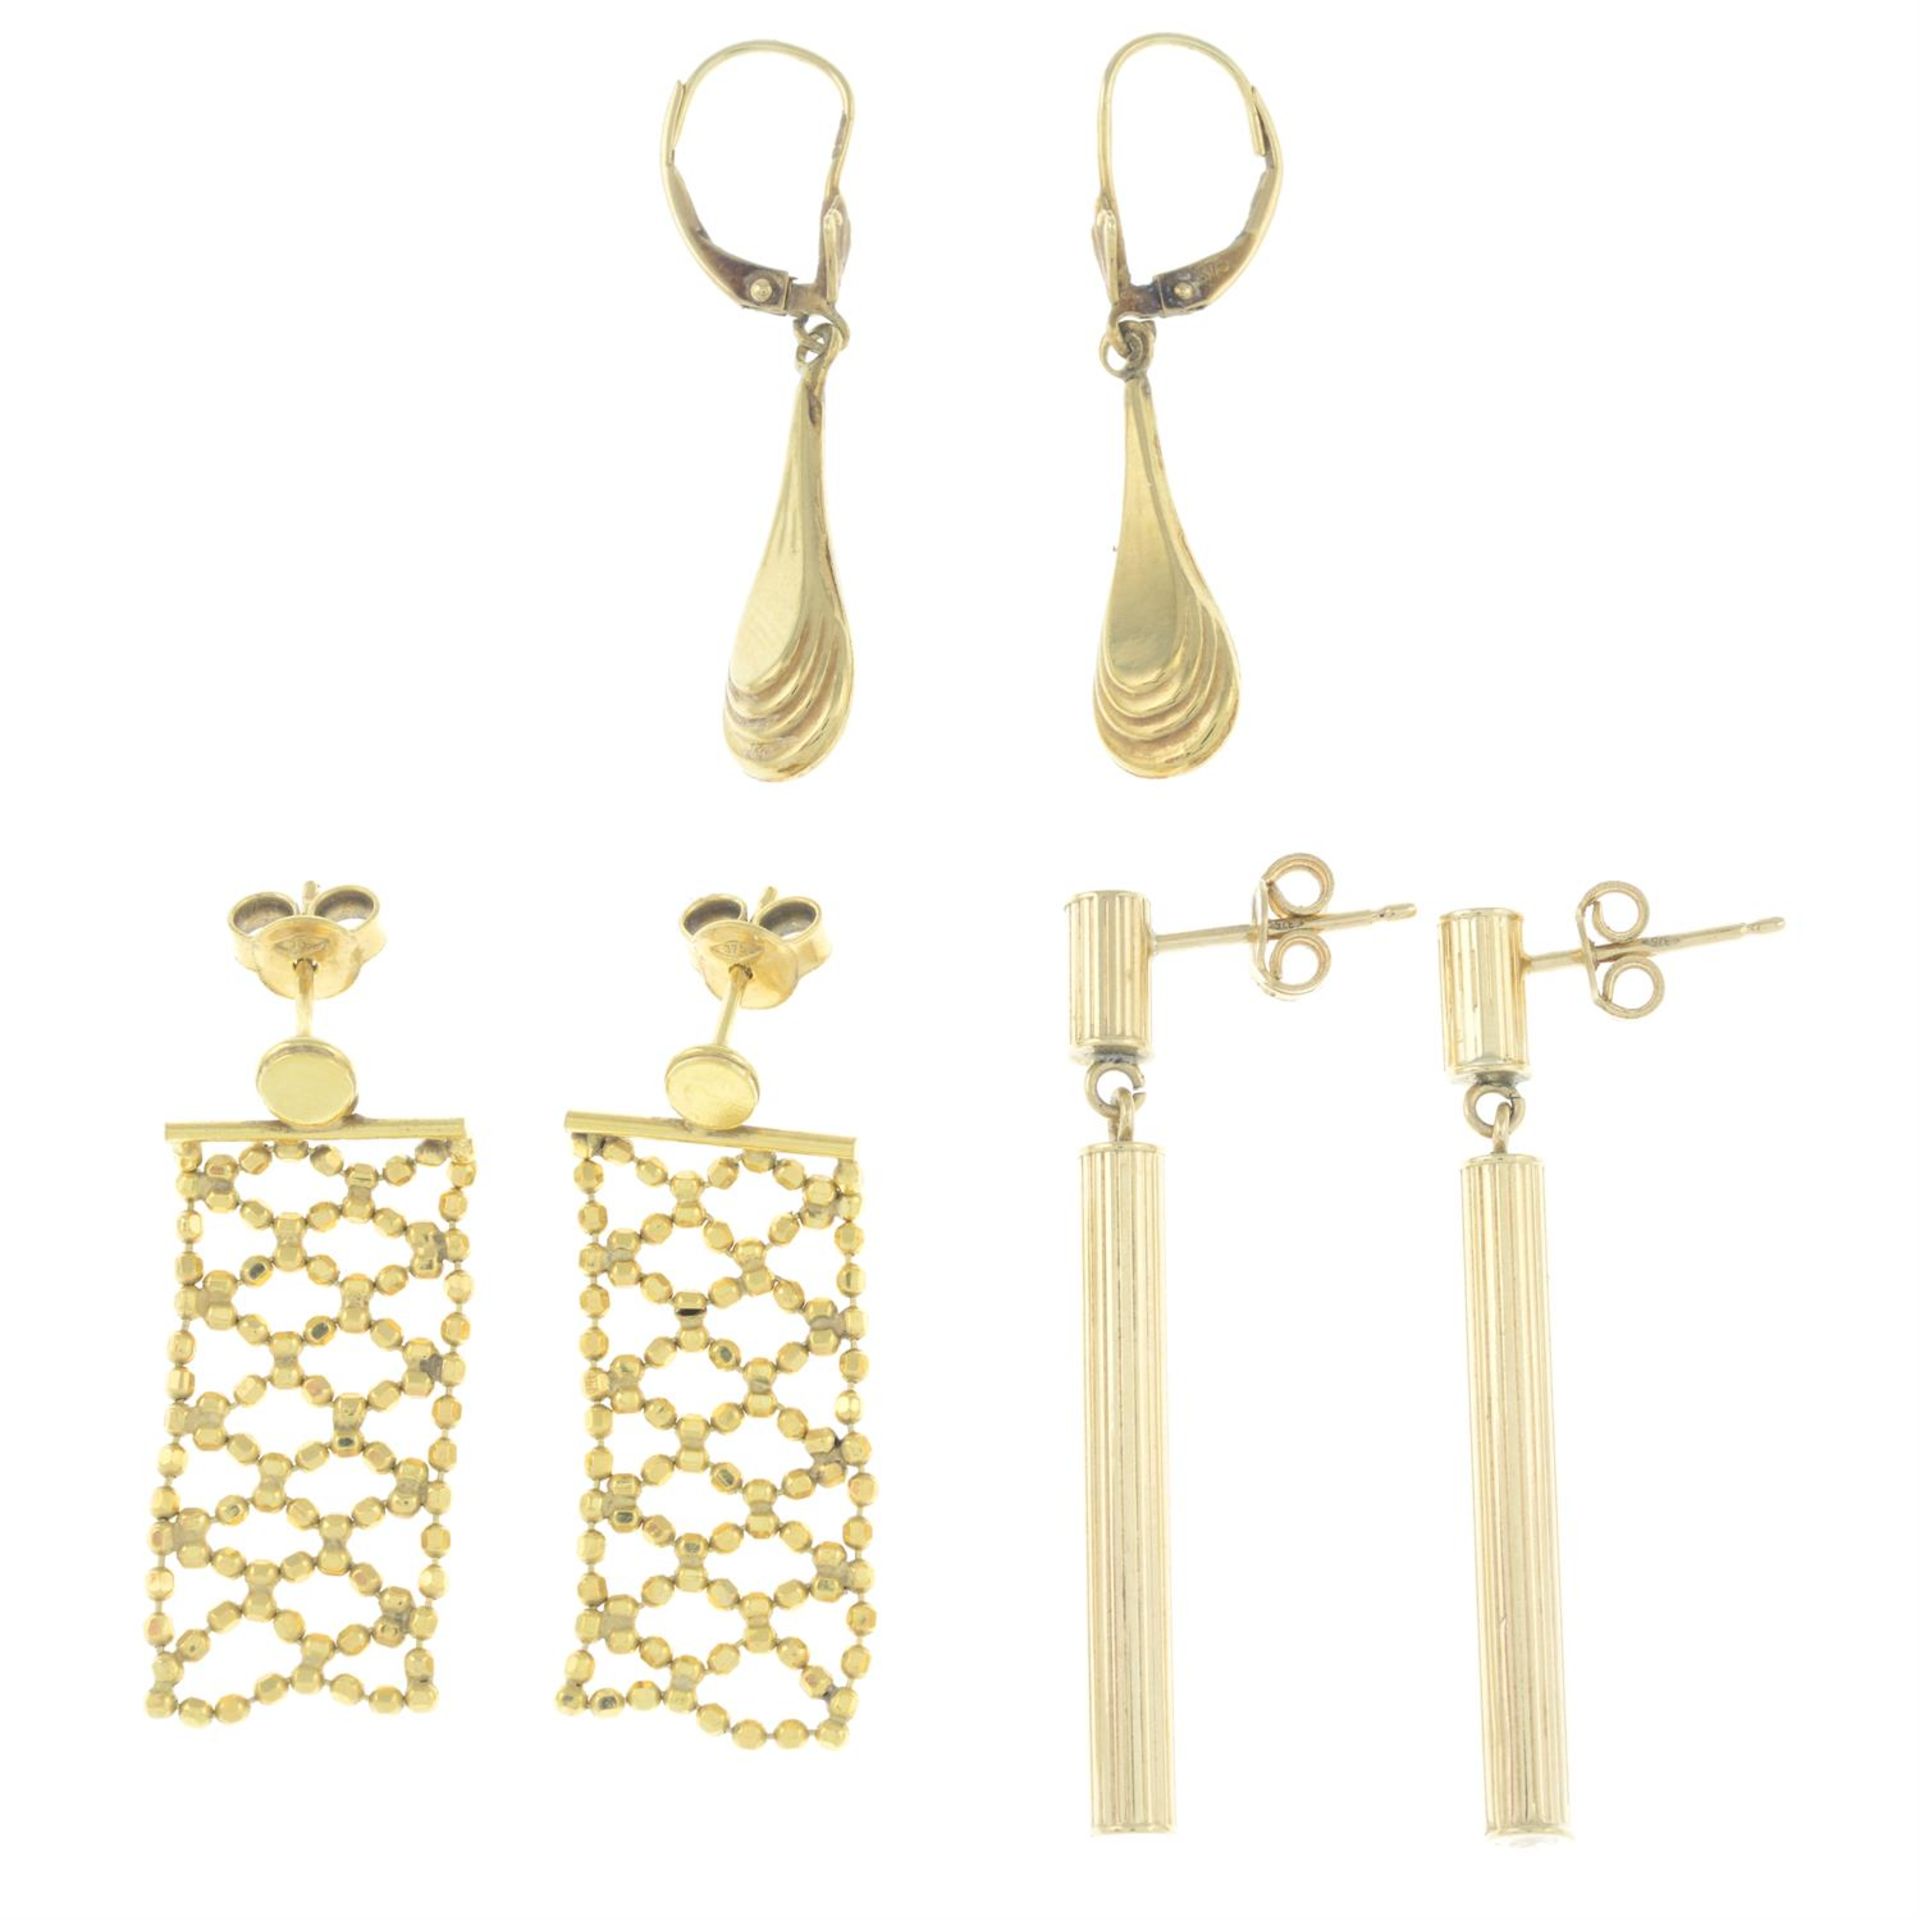 Three pairs of 9ct gold drop earrings.